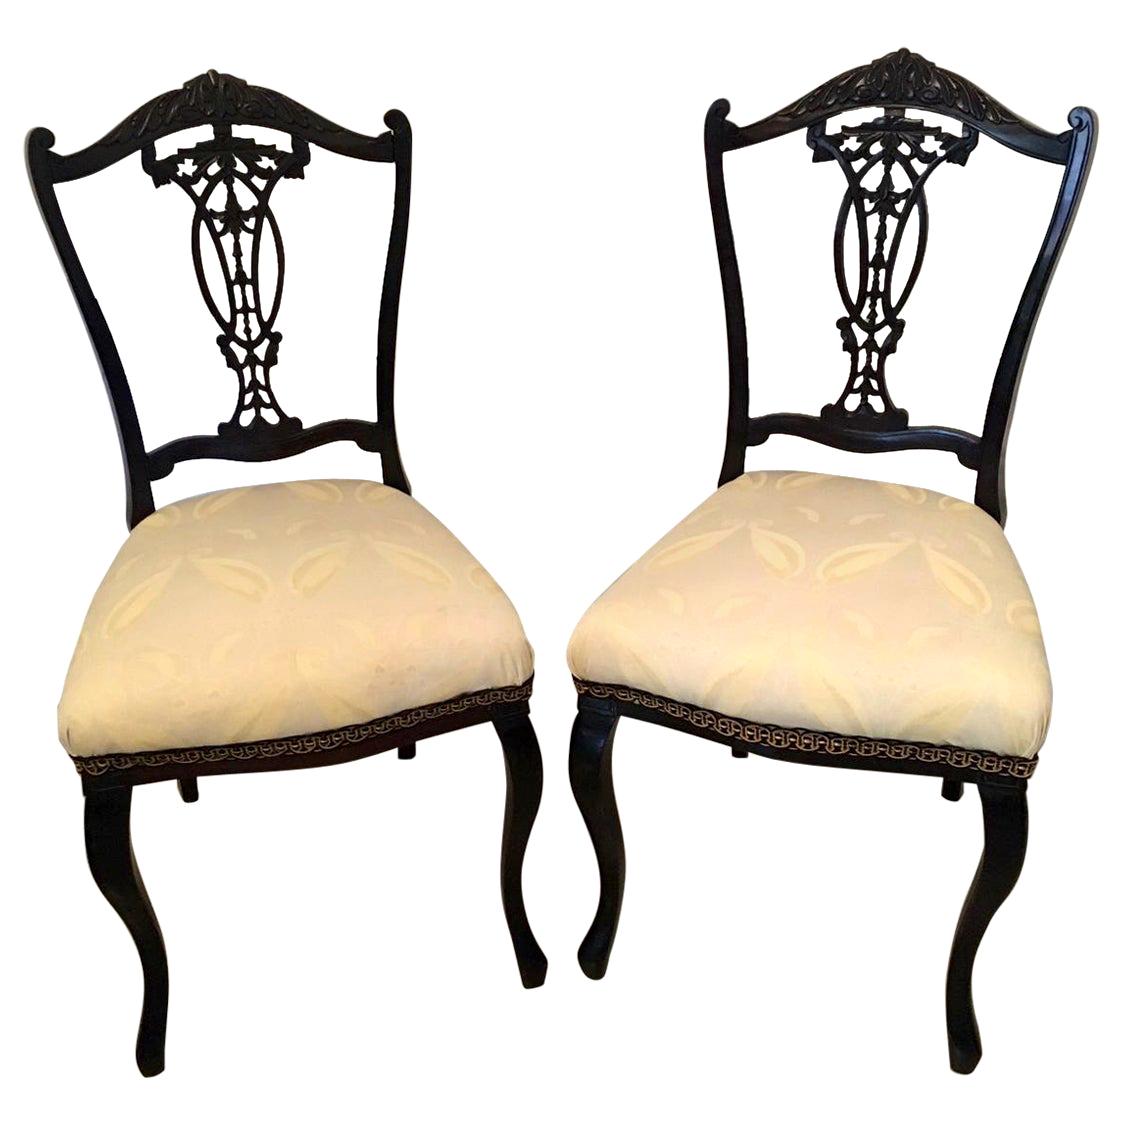 Quality Pair of 19th Century Antique Victorian Carved Ebonized Side/Desk Chairs